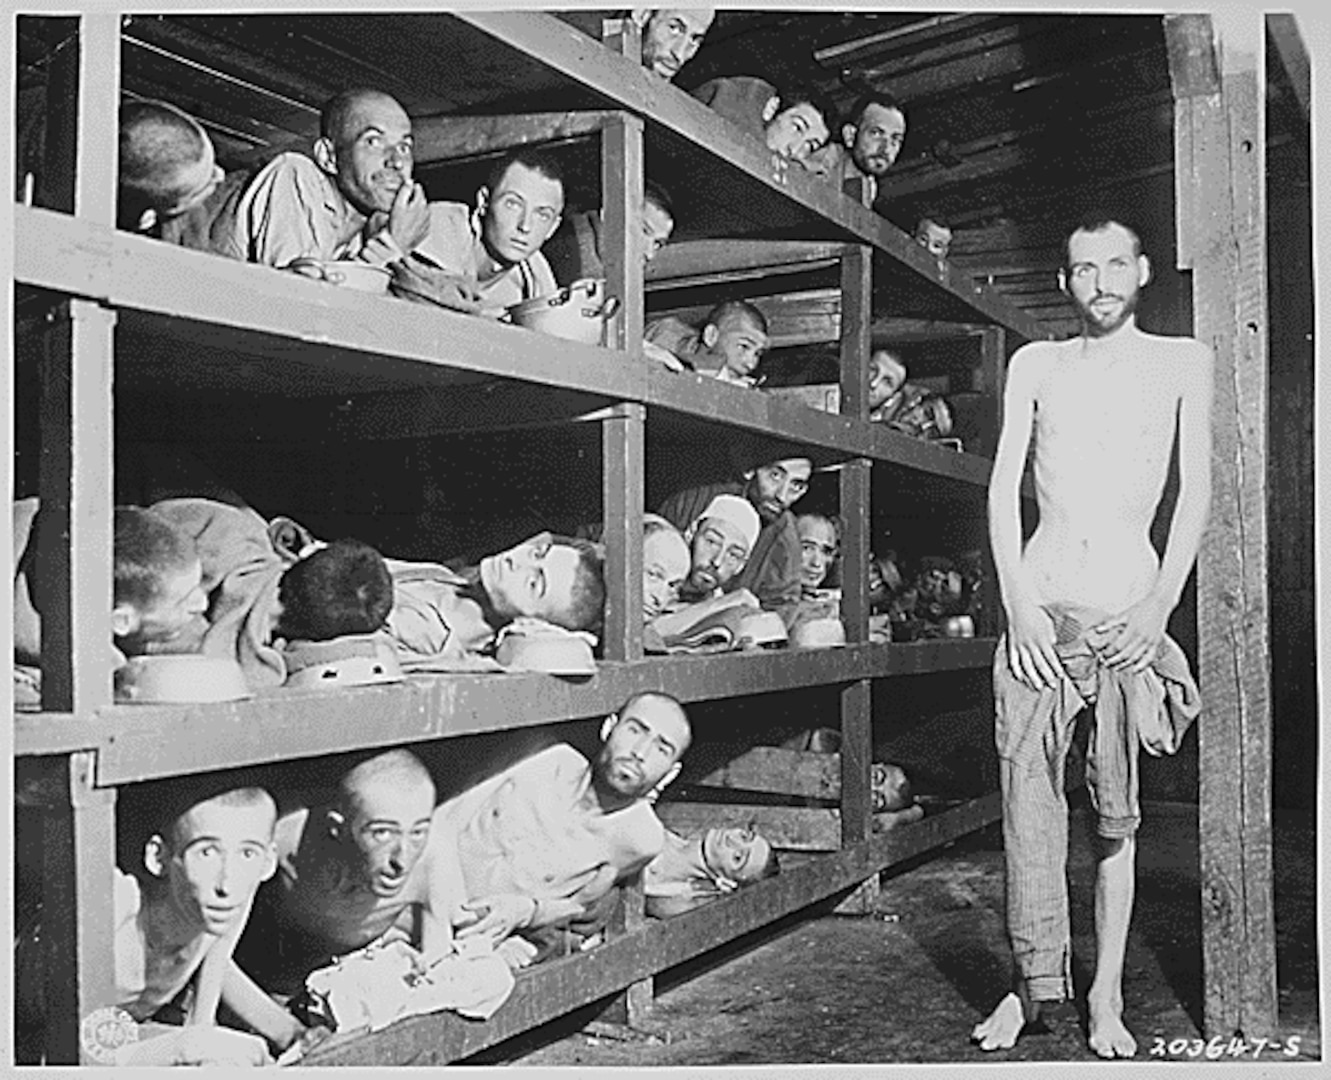 Concentration camp photo from 1945.